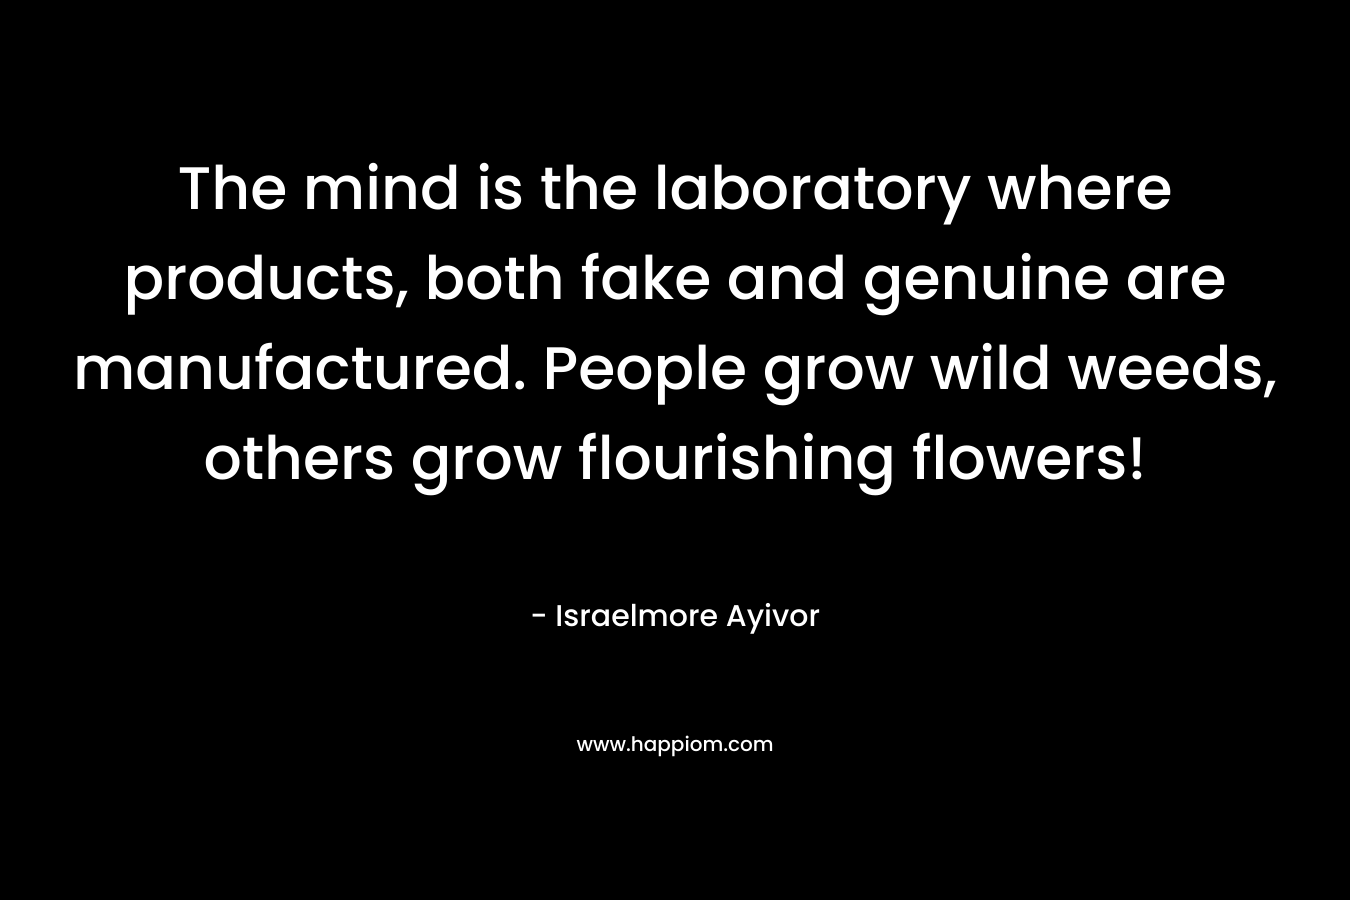 The mind is the laboratory where products, both fake and genuine are manufactured. People grow wild weeds, others grow flourishing flowers! – Israelmore Ayivor